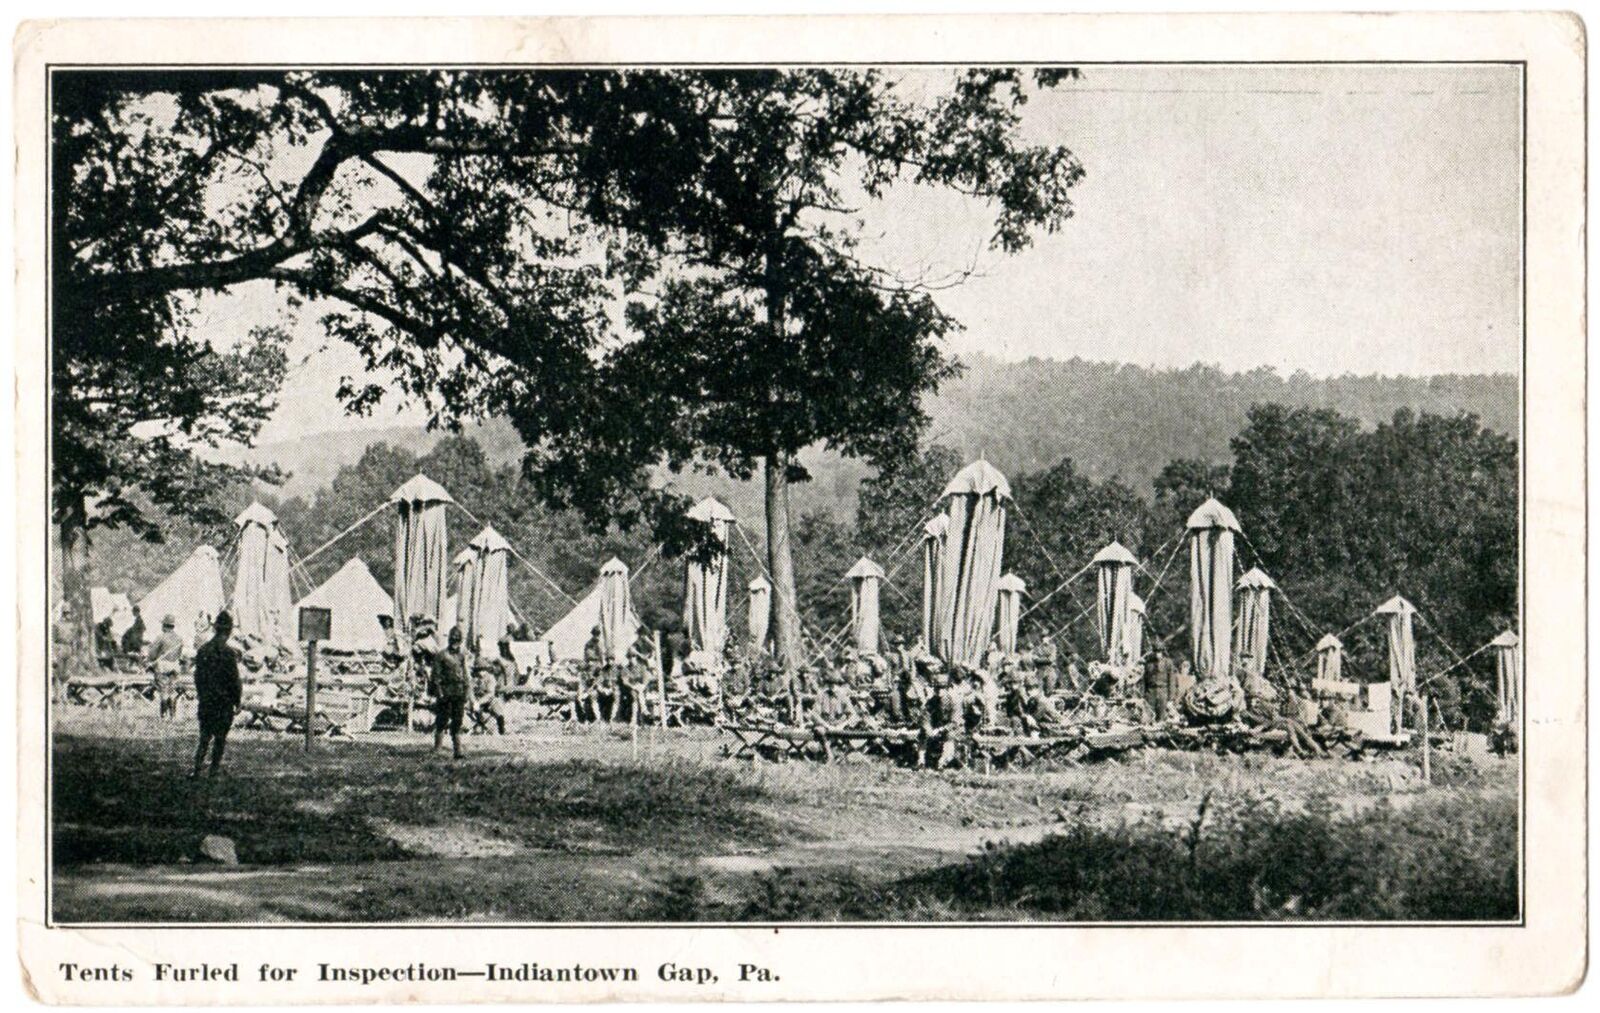 WWI era Indiantown Gap, PA - Tents Furled for Inspection